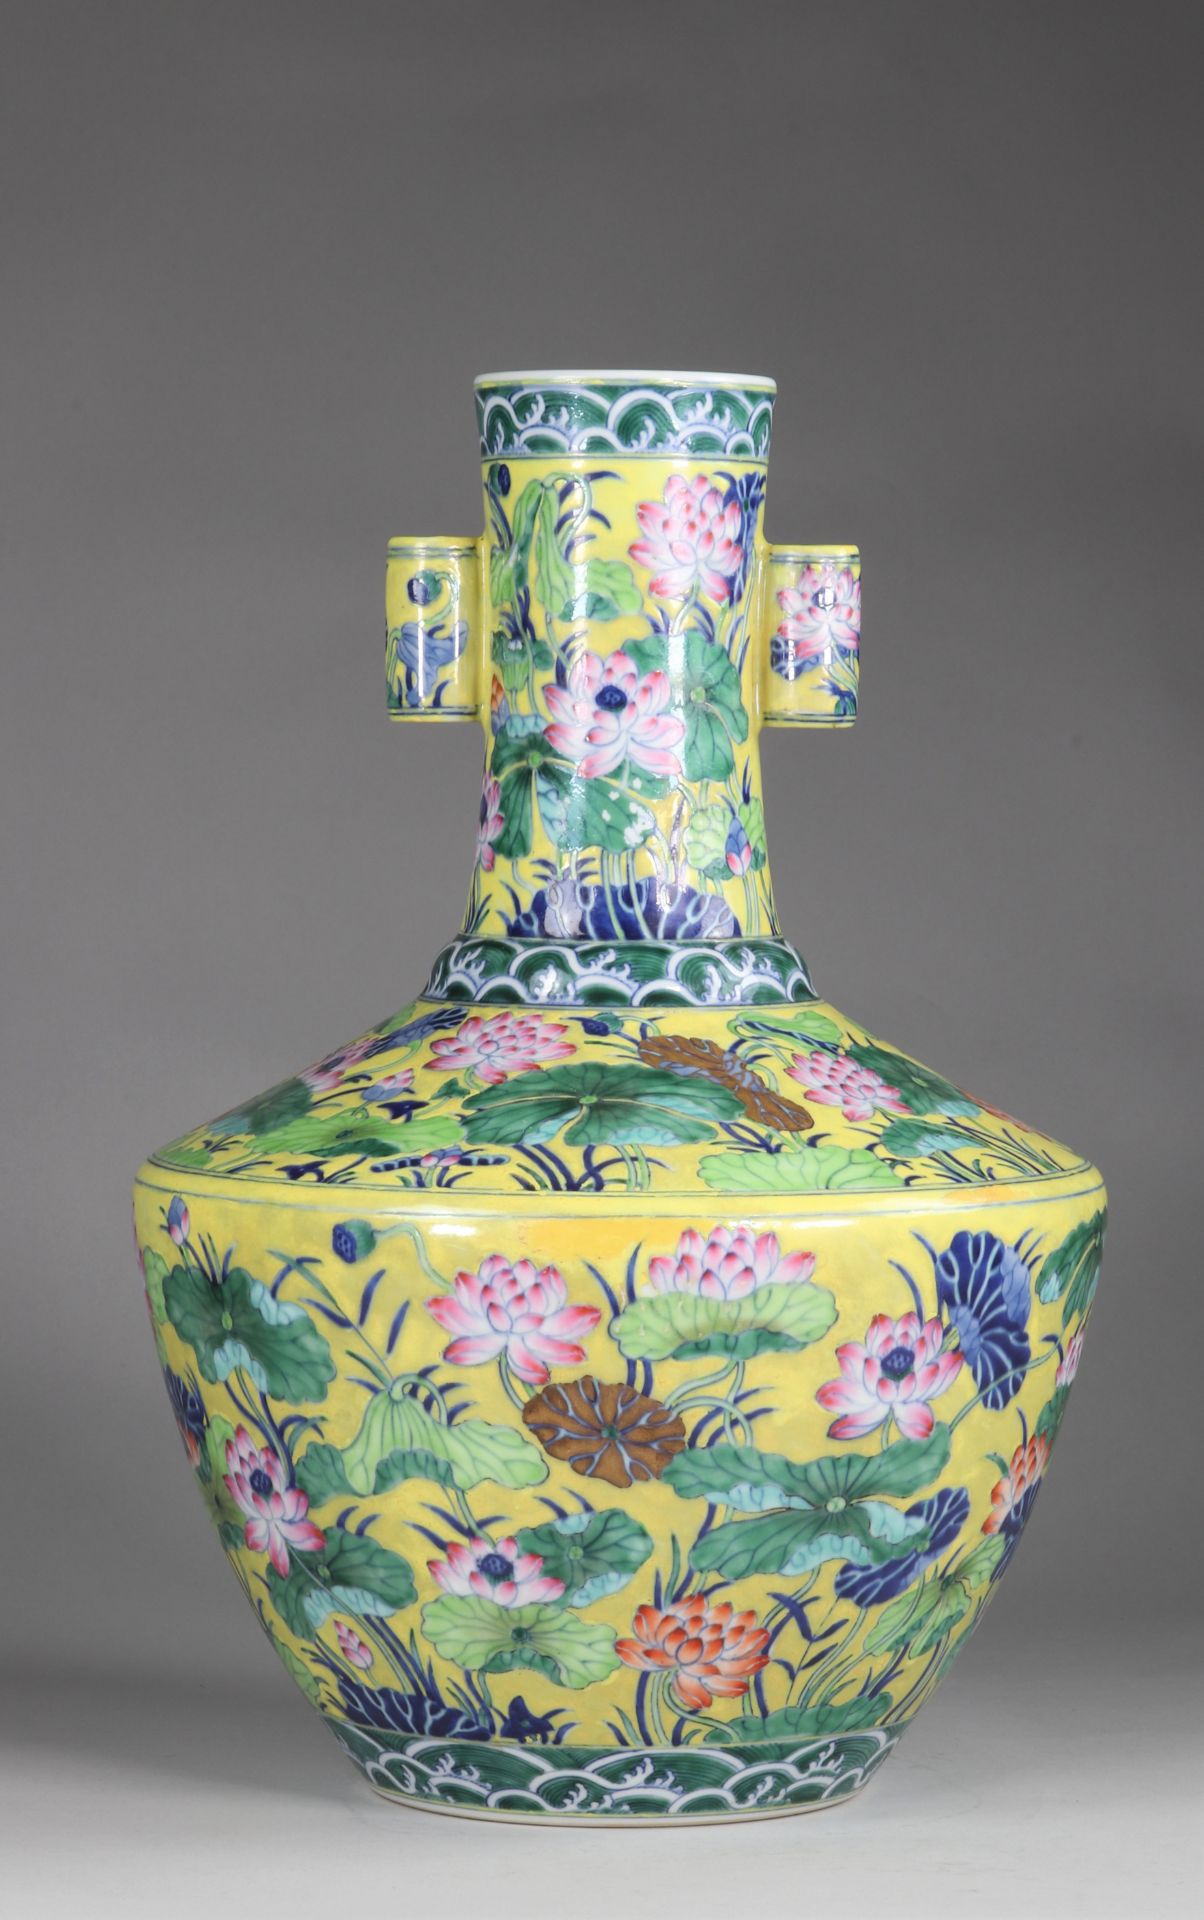 CHINA vase of archaic shape, known as -HU-, created during the Reign of Emperor Qianlong (1736-1795)